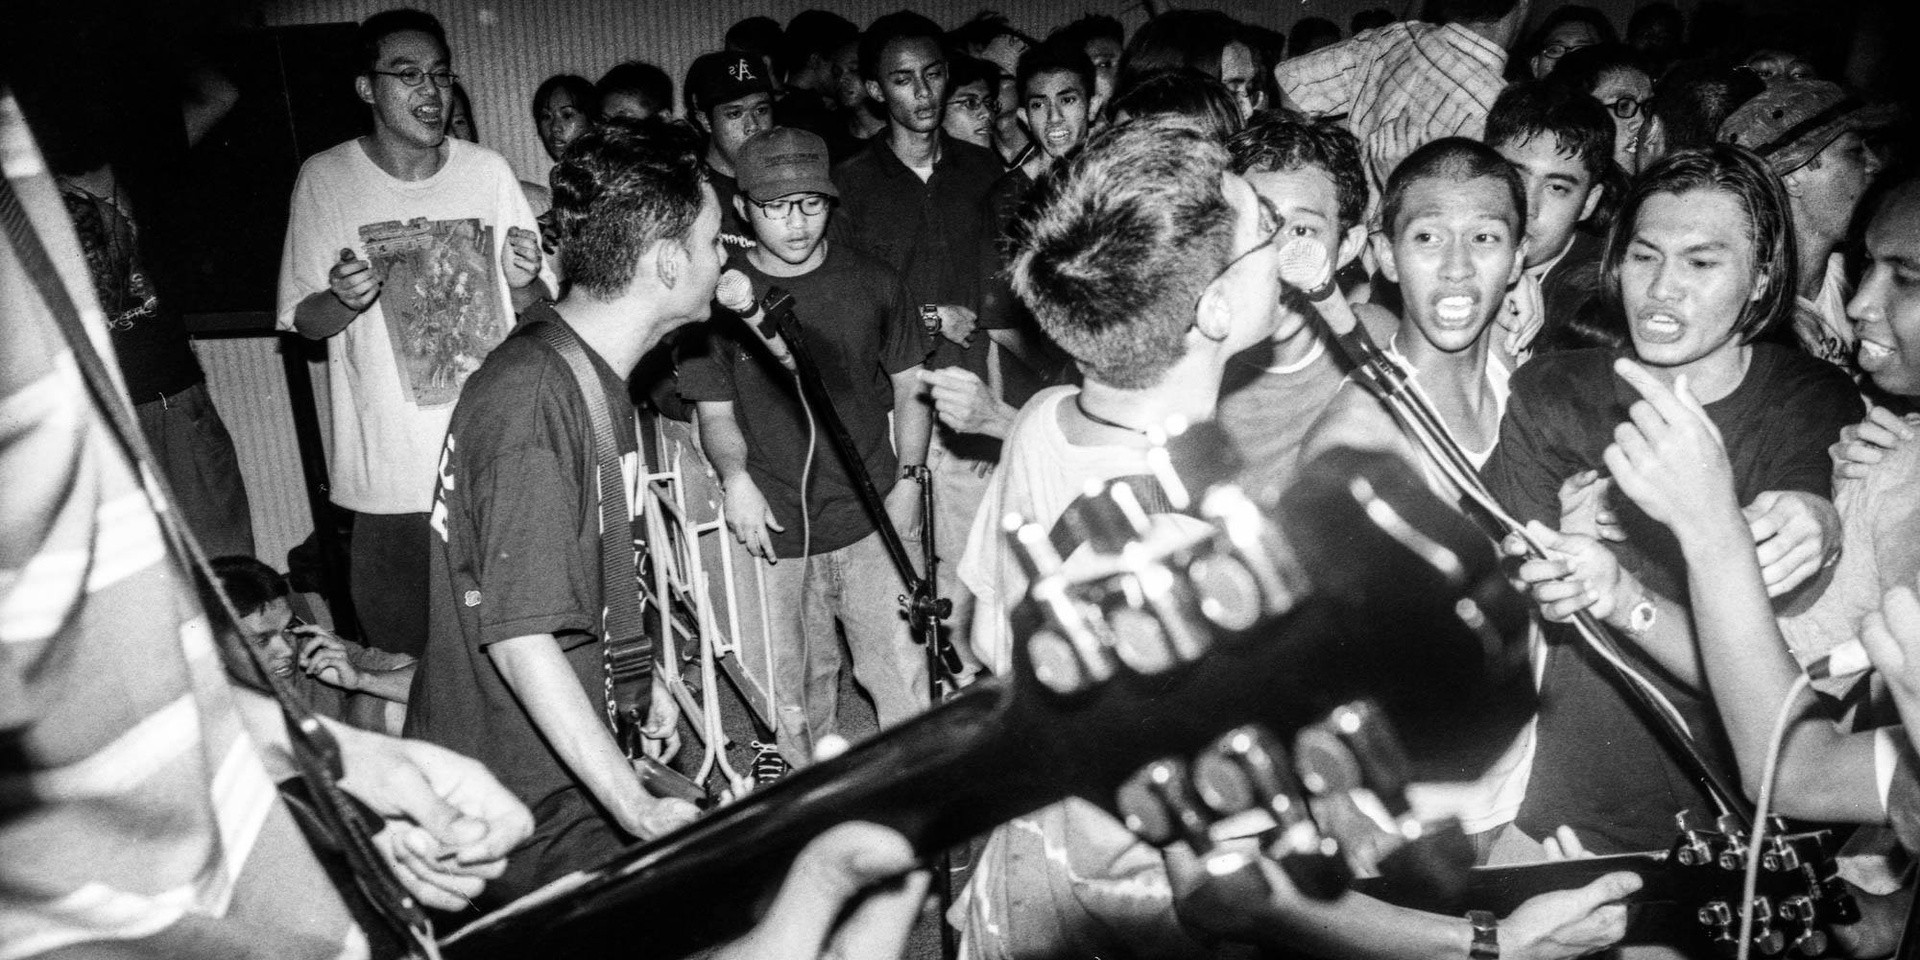 A pictorial guide to the raw energy of Singapore's underground hardcore punk scene in the 1990s